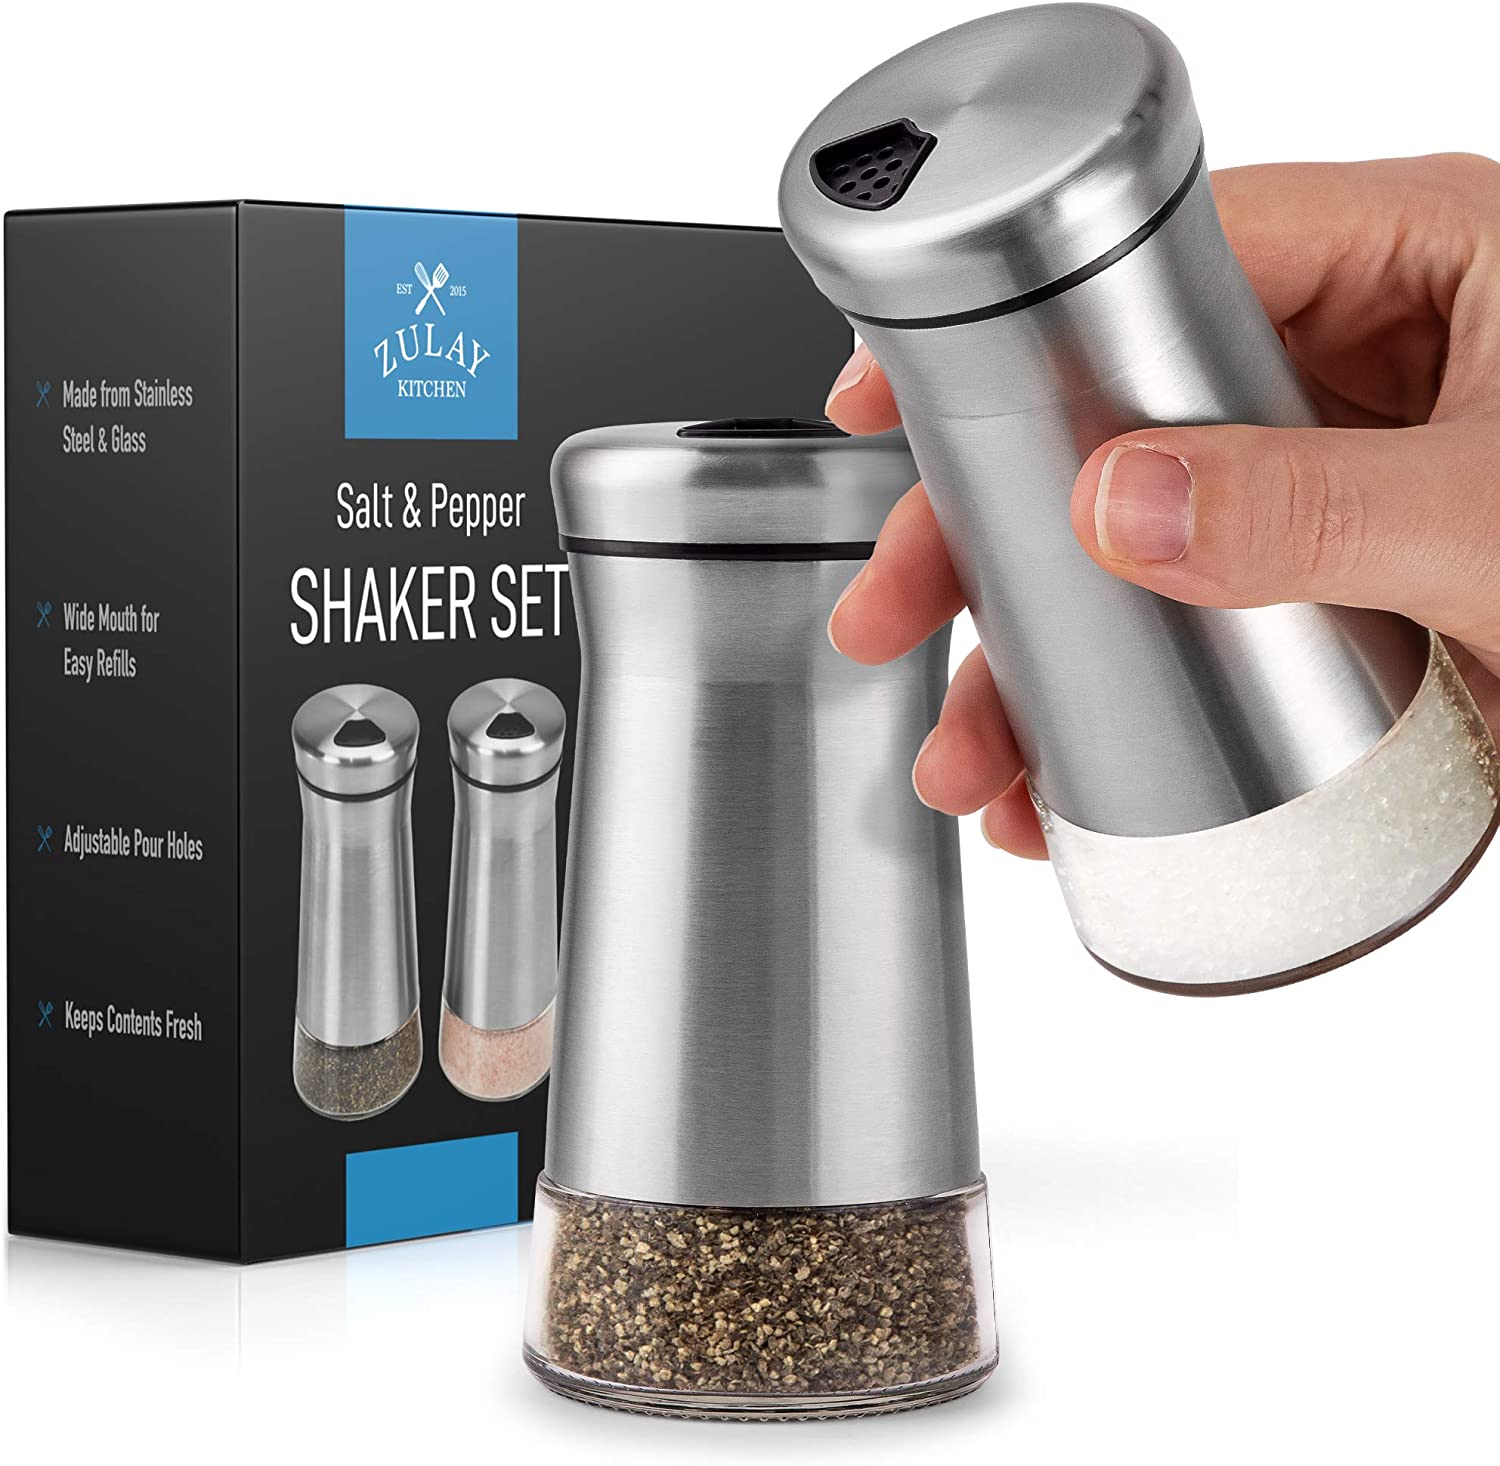 Salt And Pepper Shakers 4 oz Stainless Steel & Glass With 4 Adjustable Pour Holes - Zulay KitchenZulay Kitchen